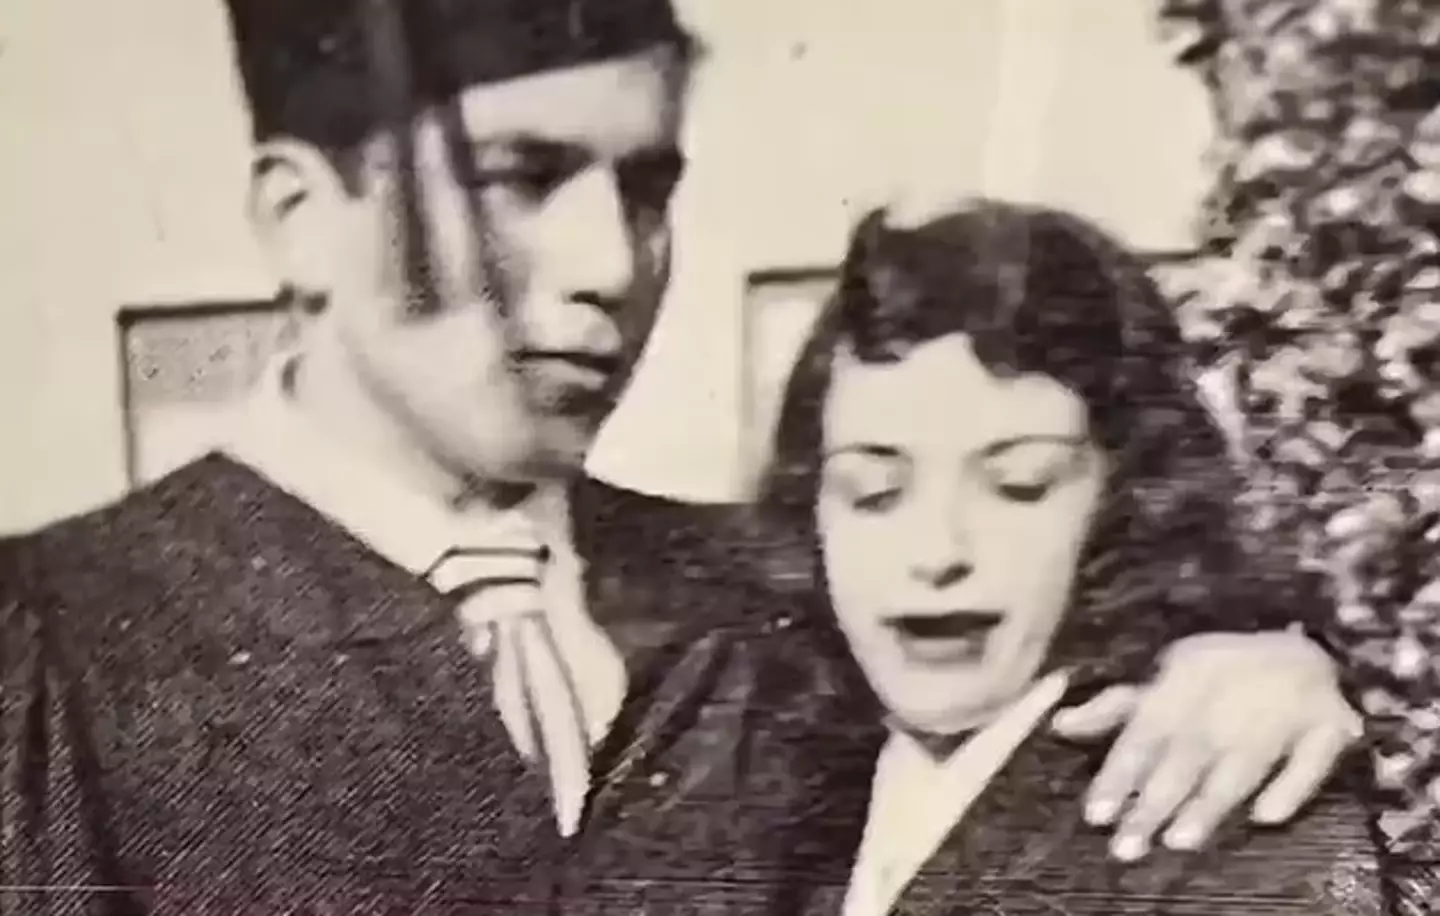 Joyce and Ernie had been married for 12 years before he disappeared.